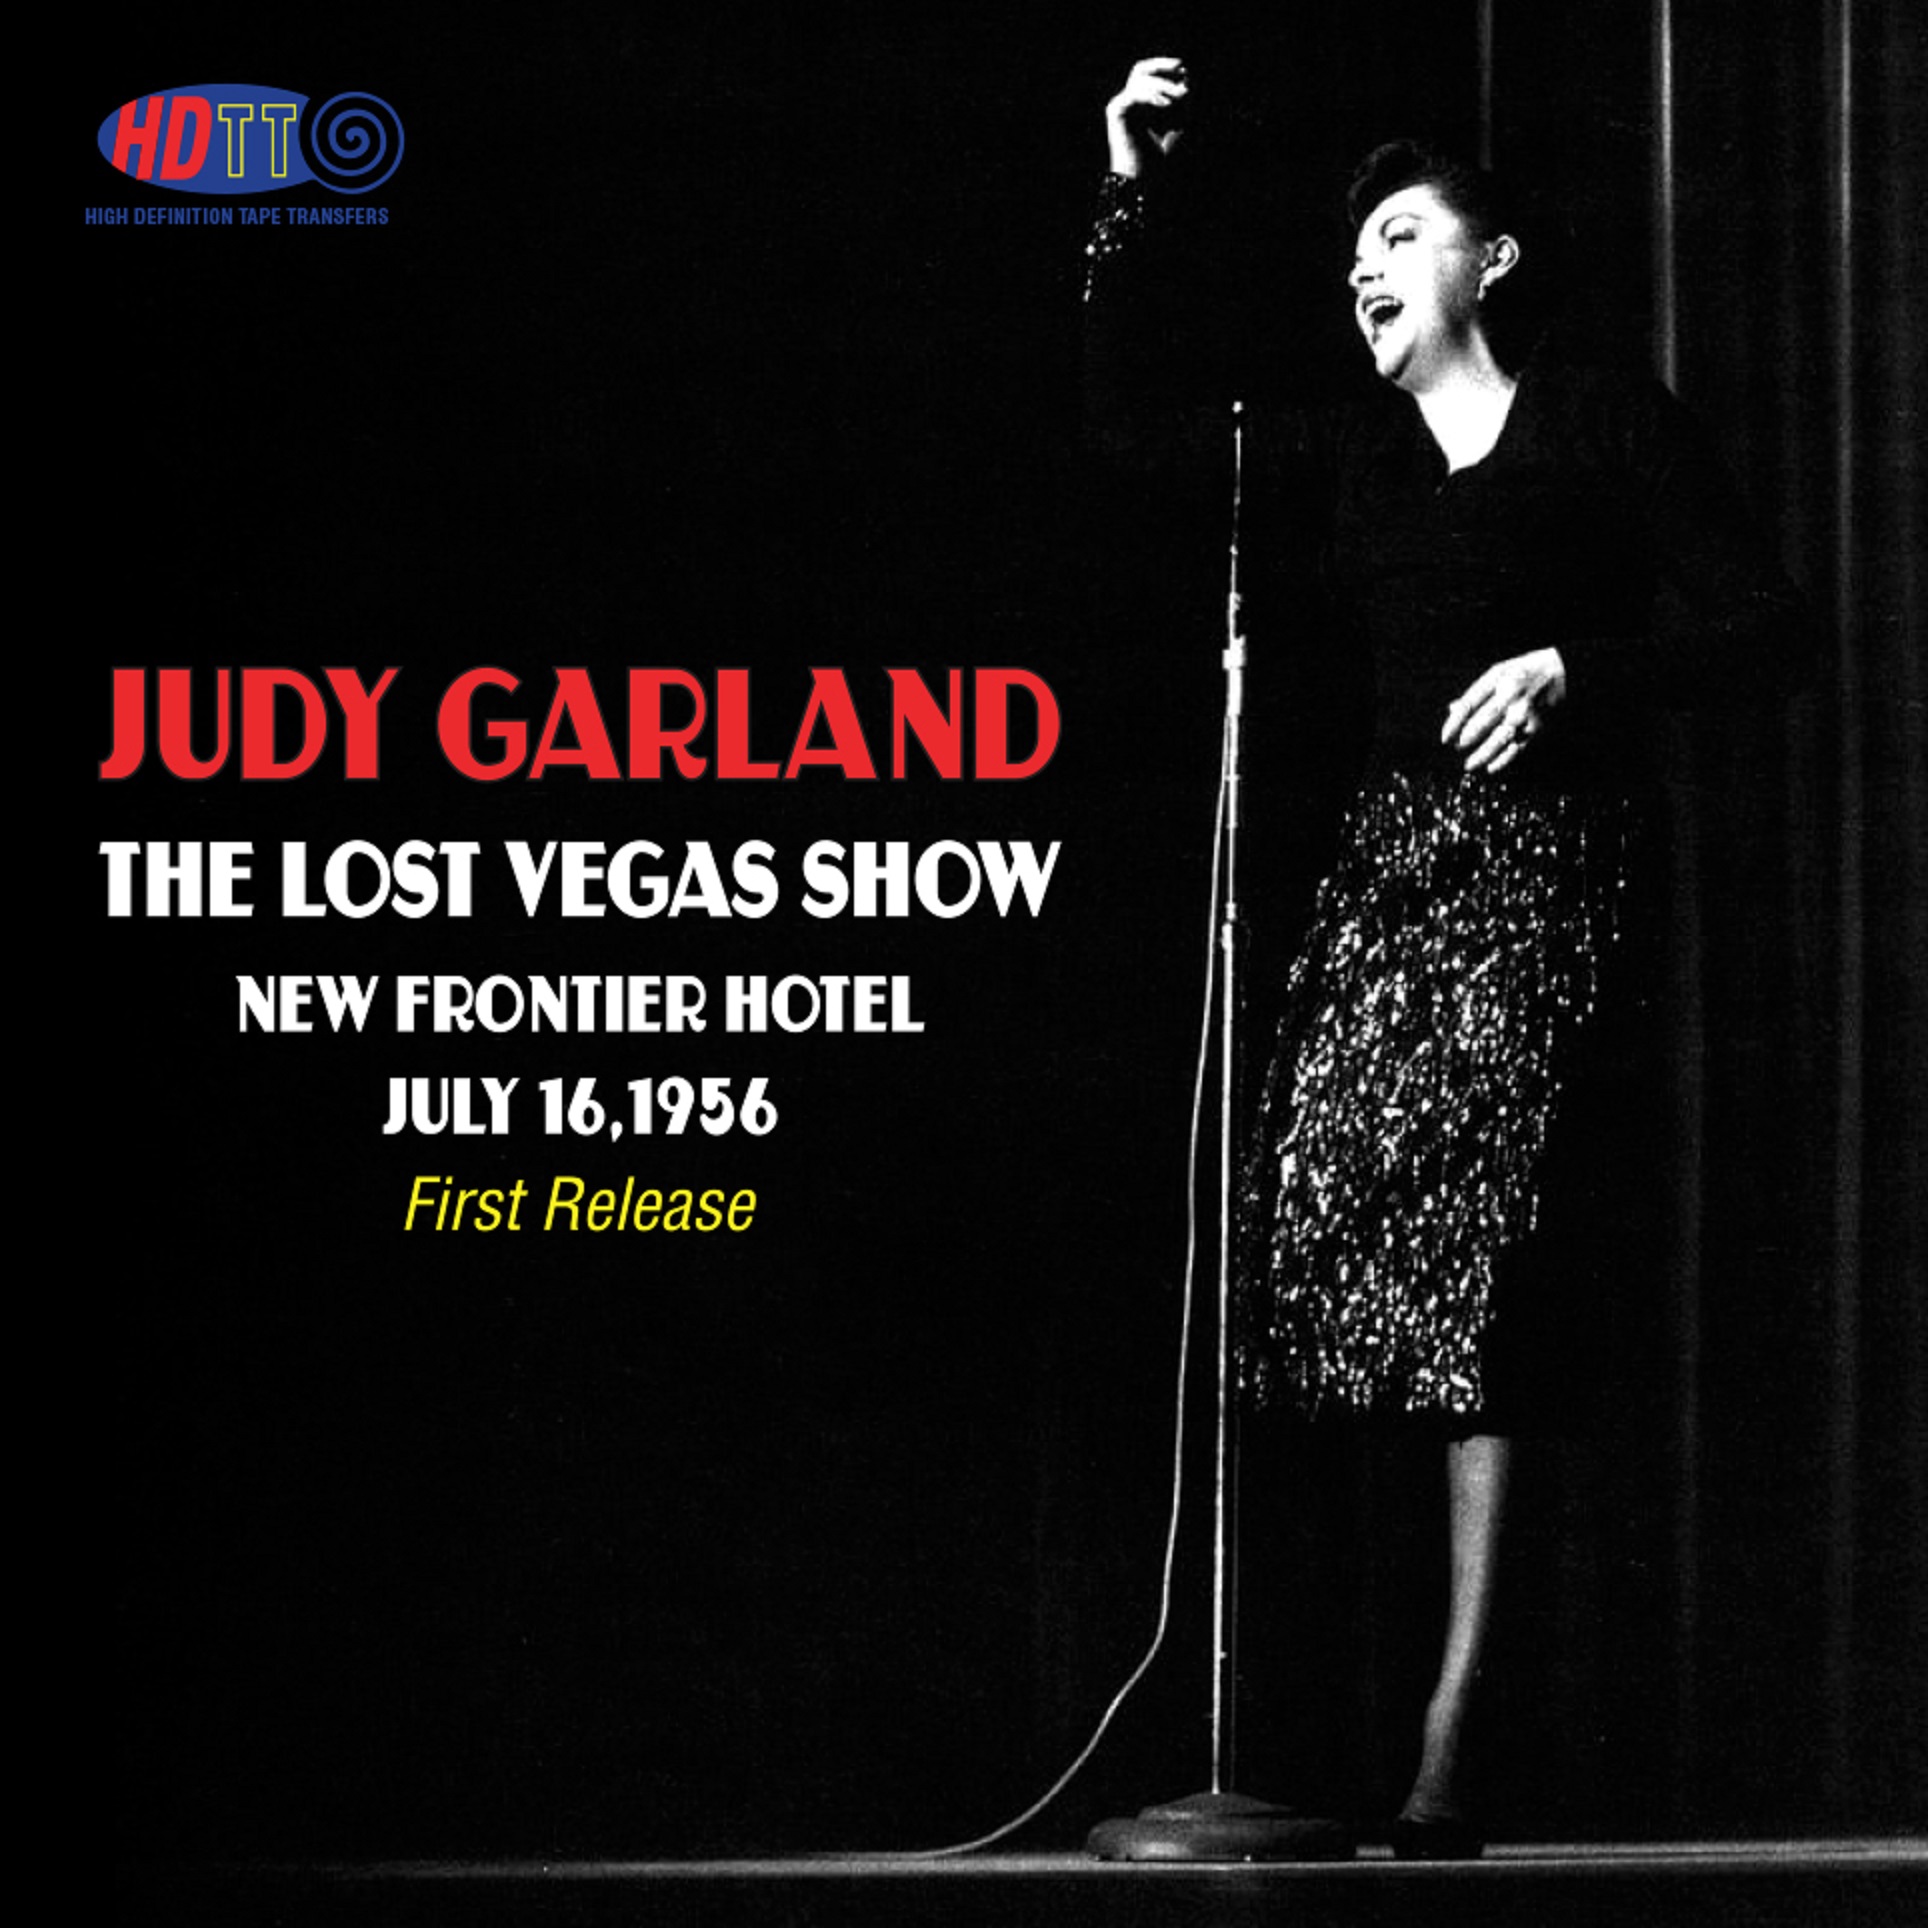 High Definition Tape Transfers Releases 1956  Judy Garland Las Vegas Show for the First Time